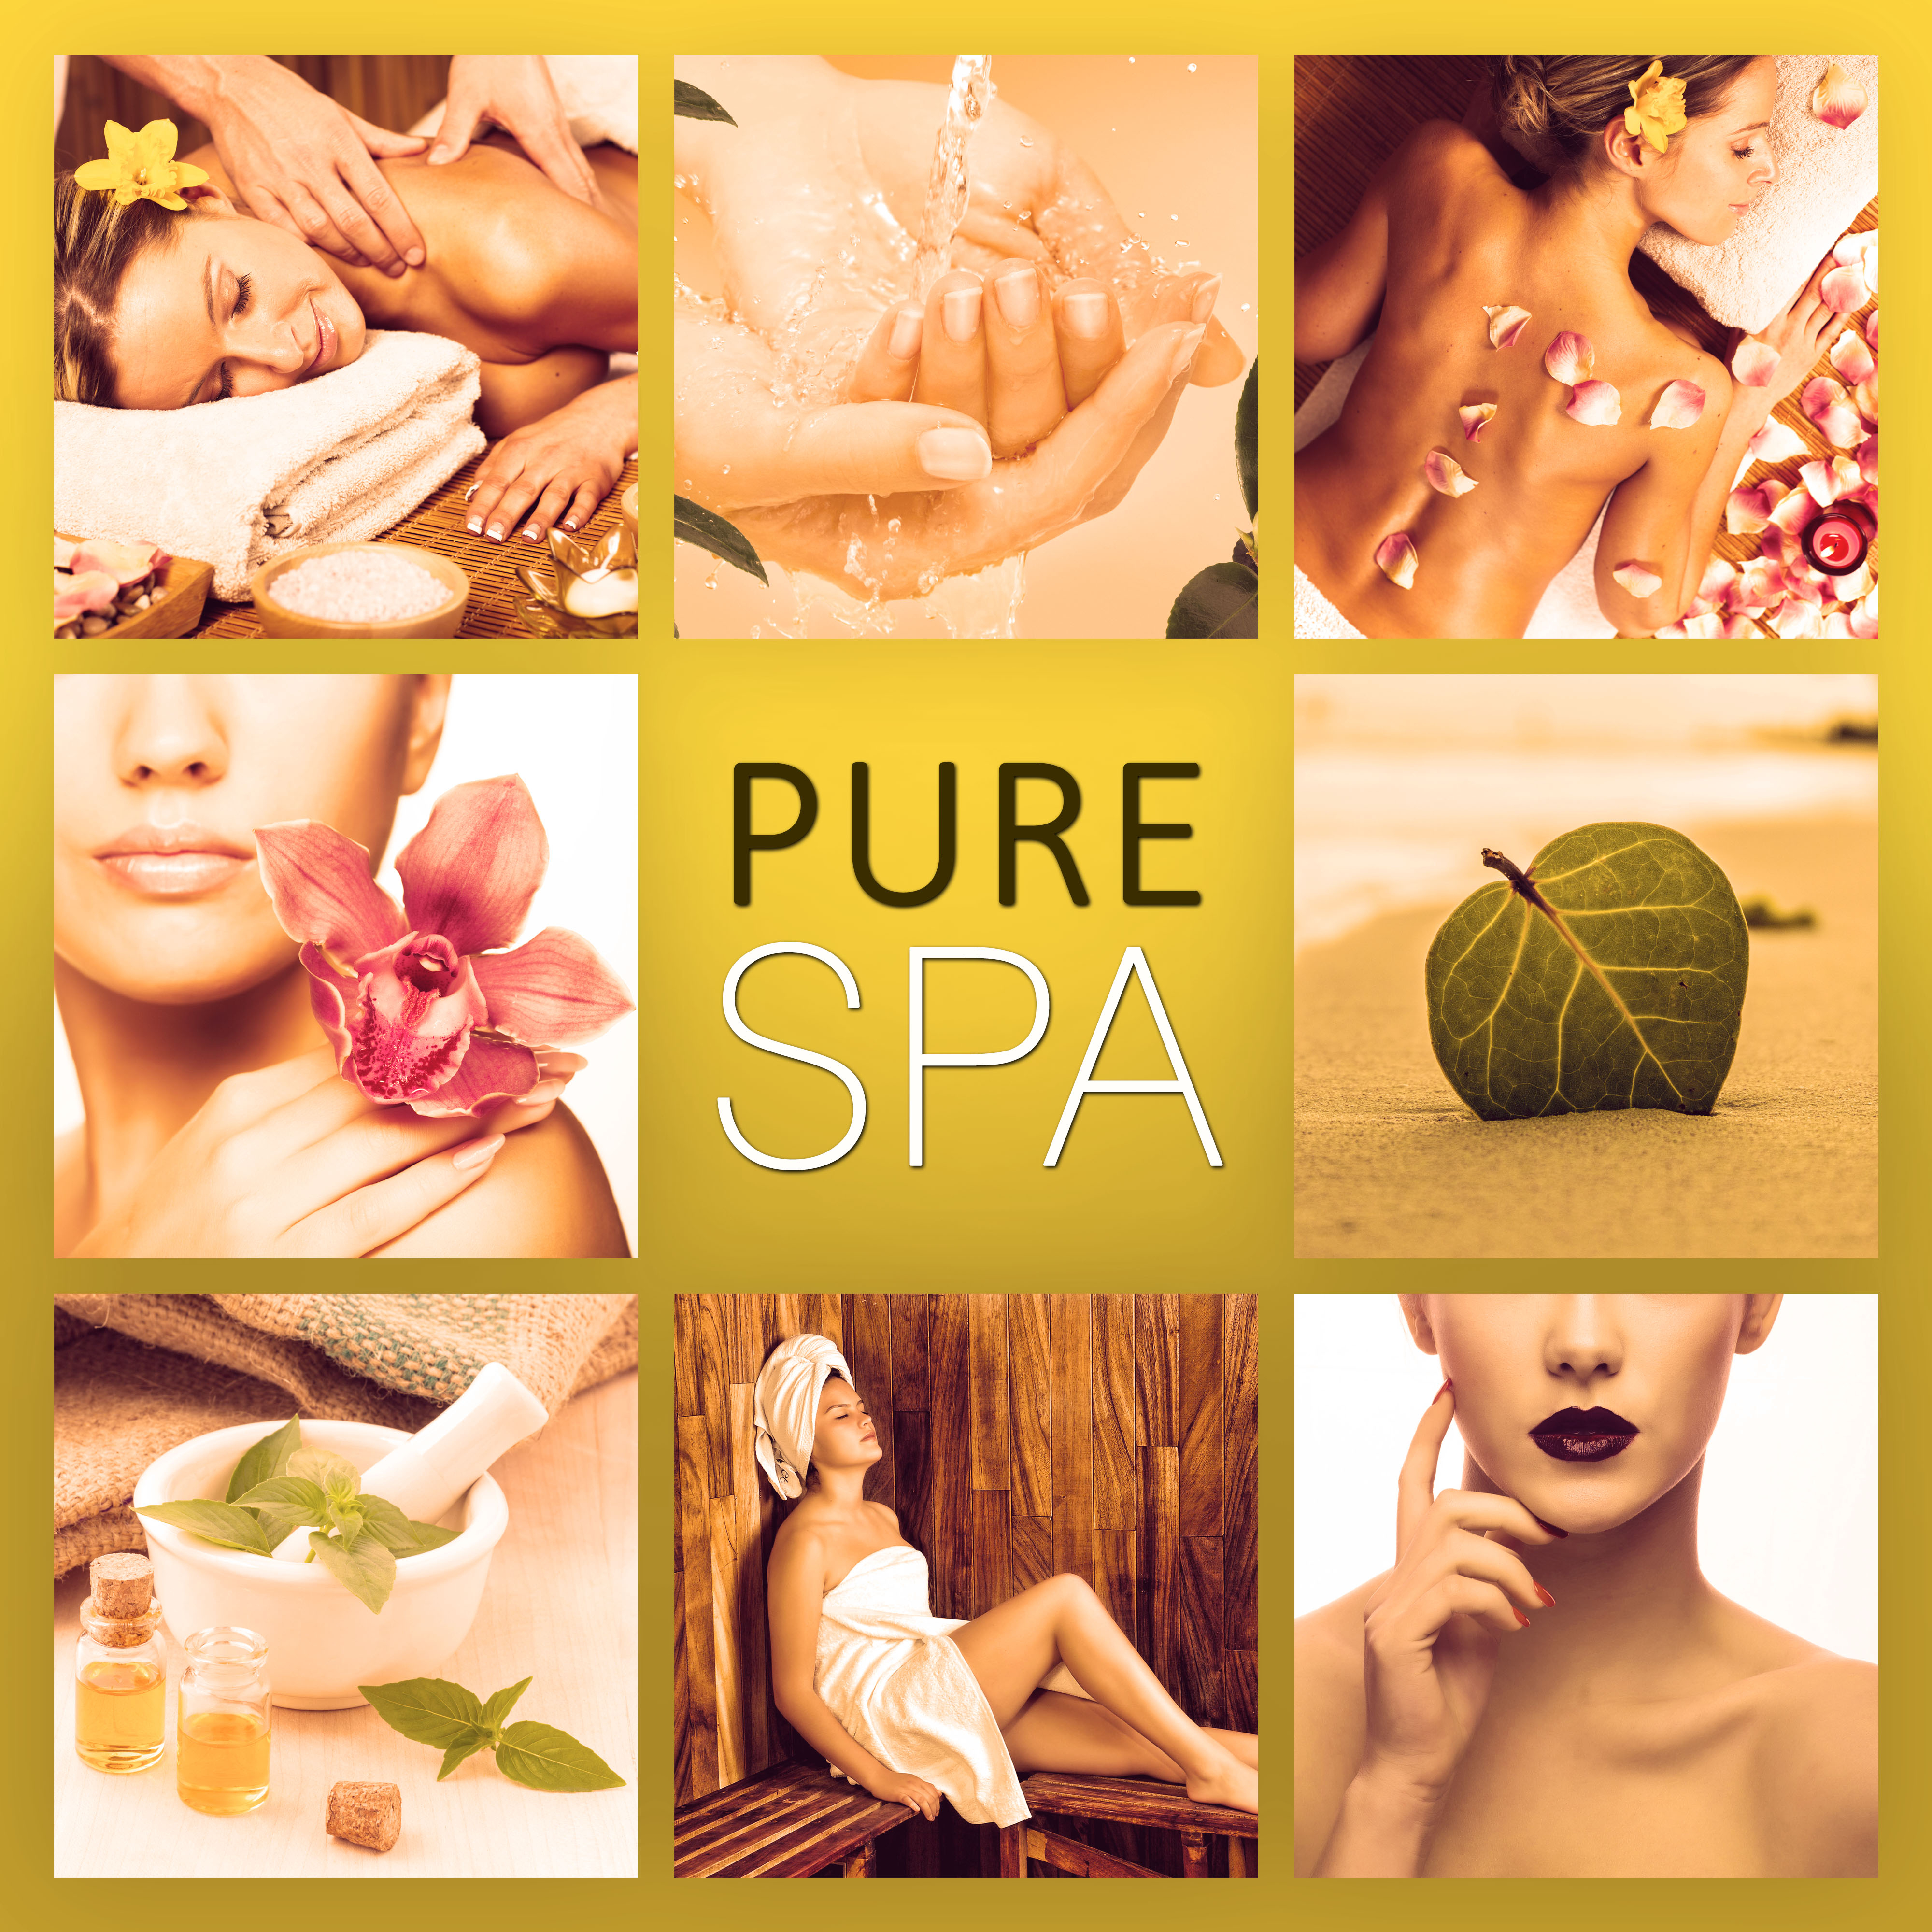 Pure Spa  Nature Sounds, Calm Down, Deep Re axation, Spa Music, Peaceful Music